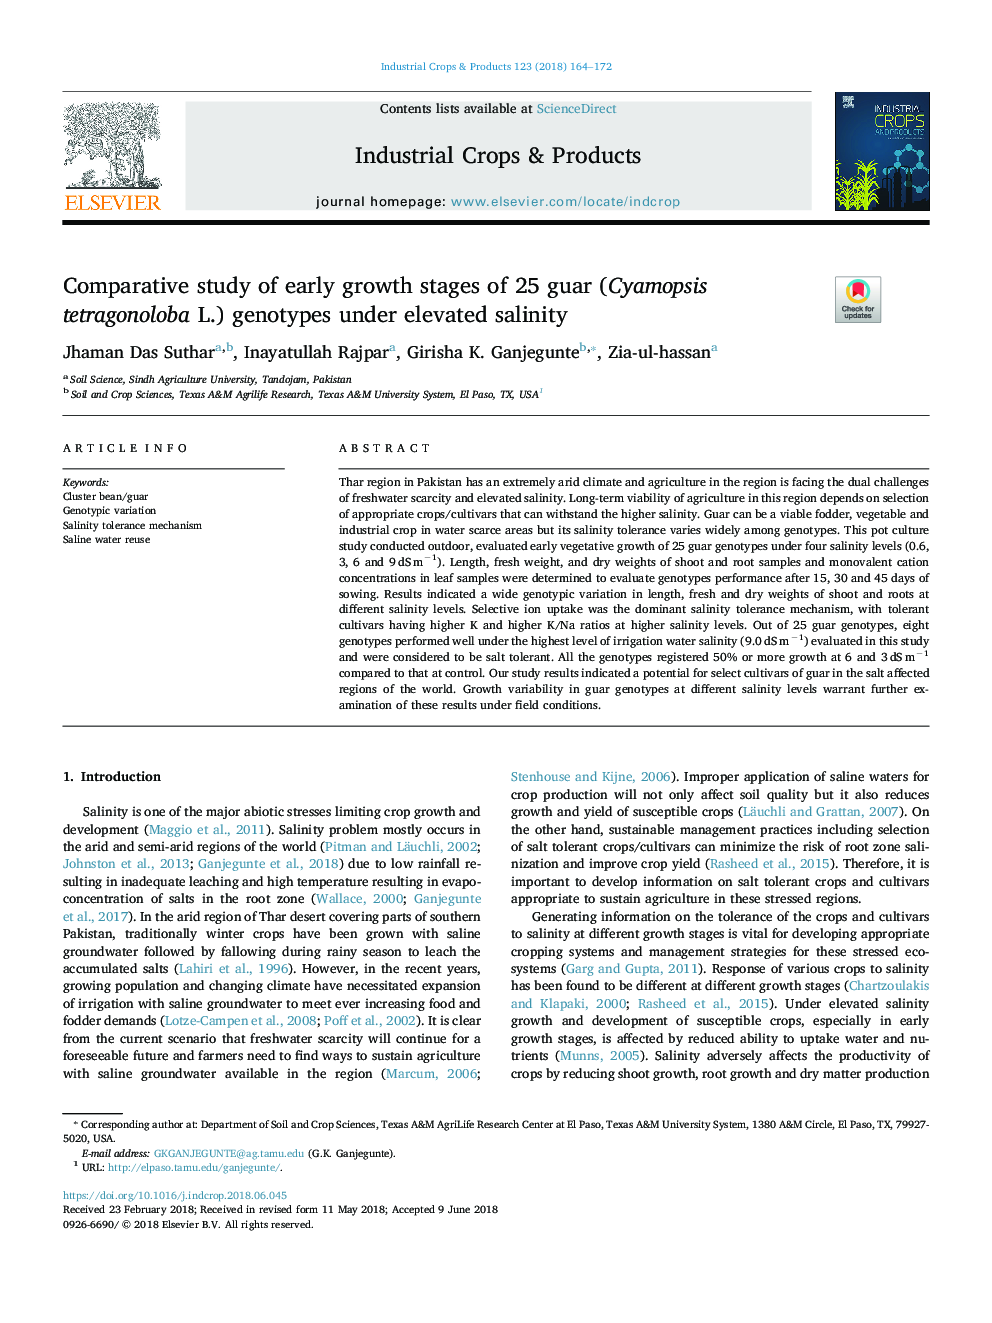 Comparative study of early growth stages of 25 guar (Cyamopsis tetragonoloba L.) genotypes under elevated salinity